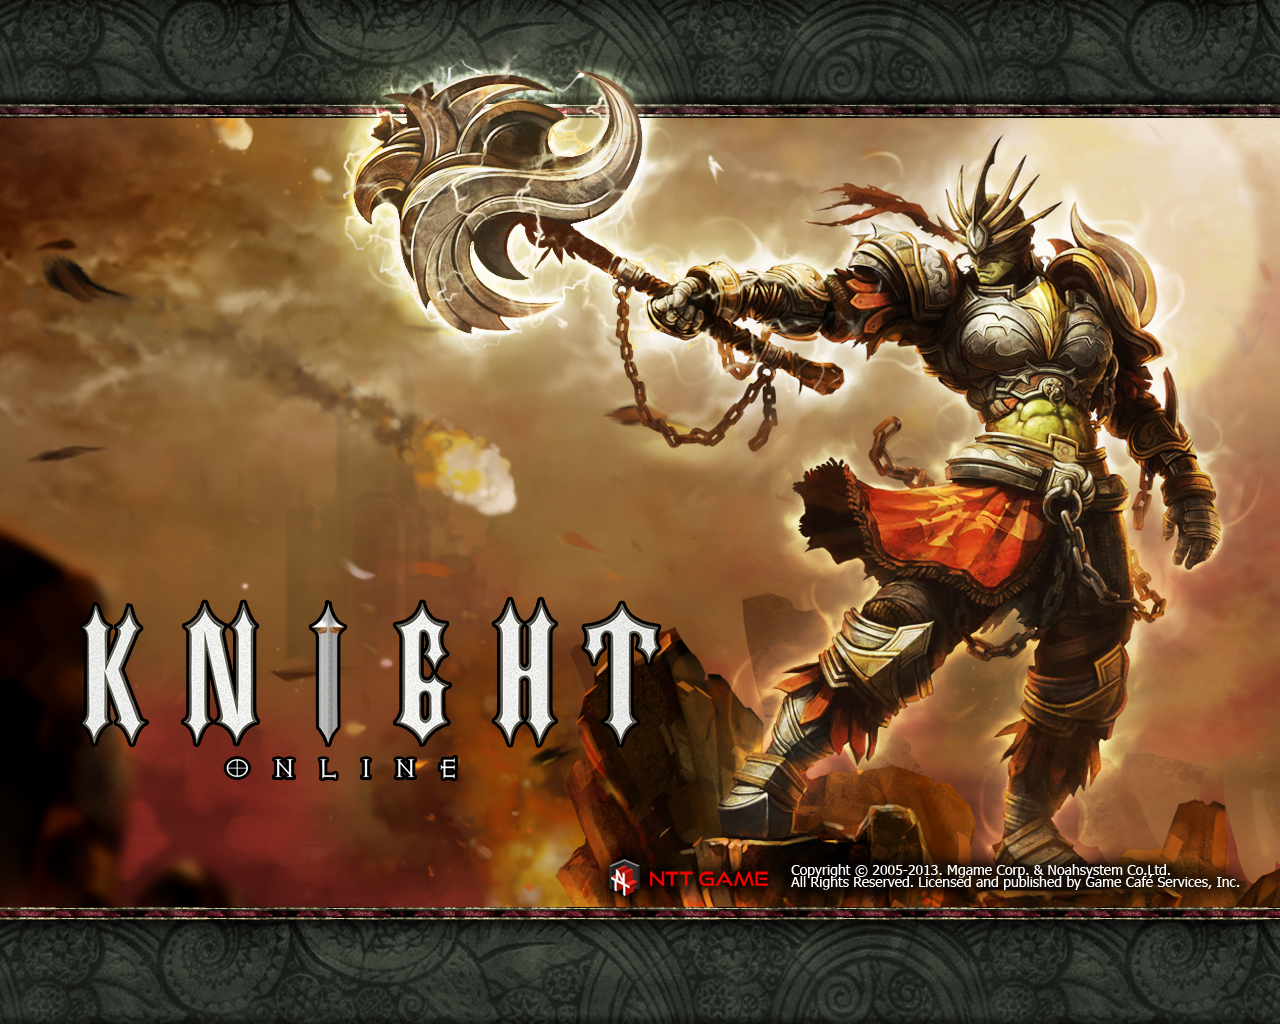 knight online wallpaper,action adventure game,pc game,cg artwork,fictional character,adventure game